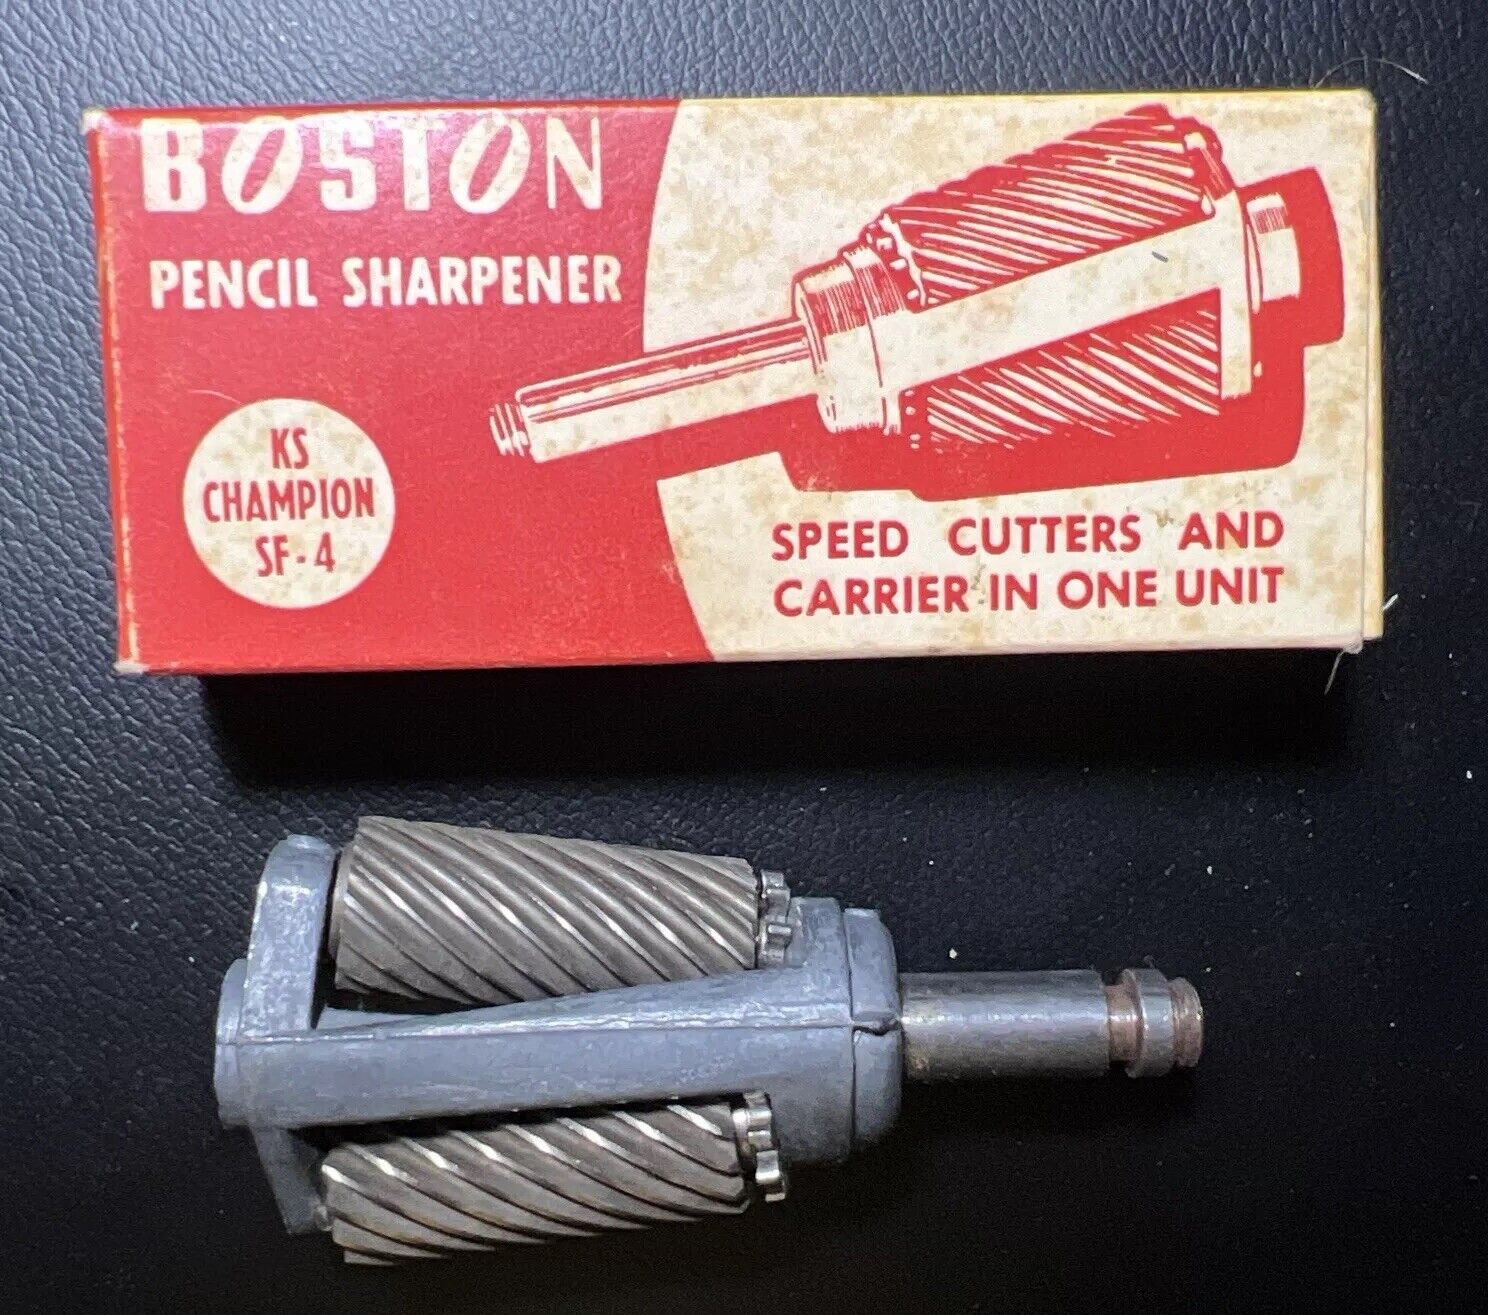 Vtg NEW Boston Pencil Sharpener KS Champion SF-4 Speed Cutters With Carrier. NOS